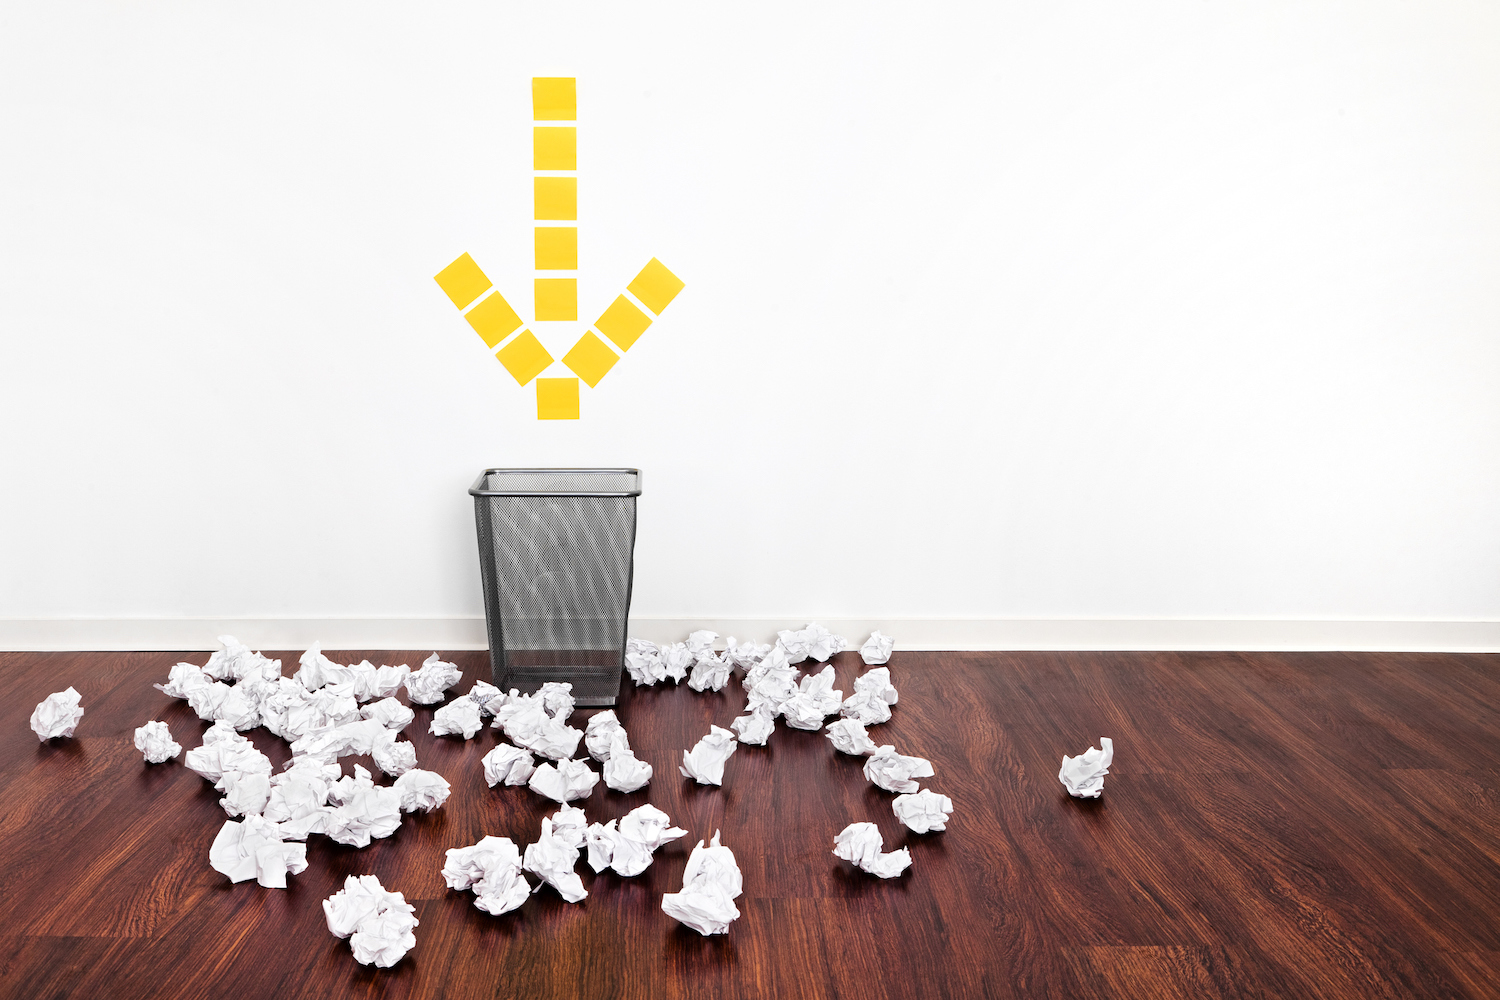 "Failure" Office Metaphor a wastebasket with an yellow arrow pointing to it that is surrounded by crumpled paper balls.